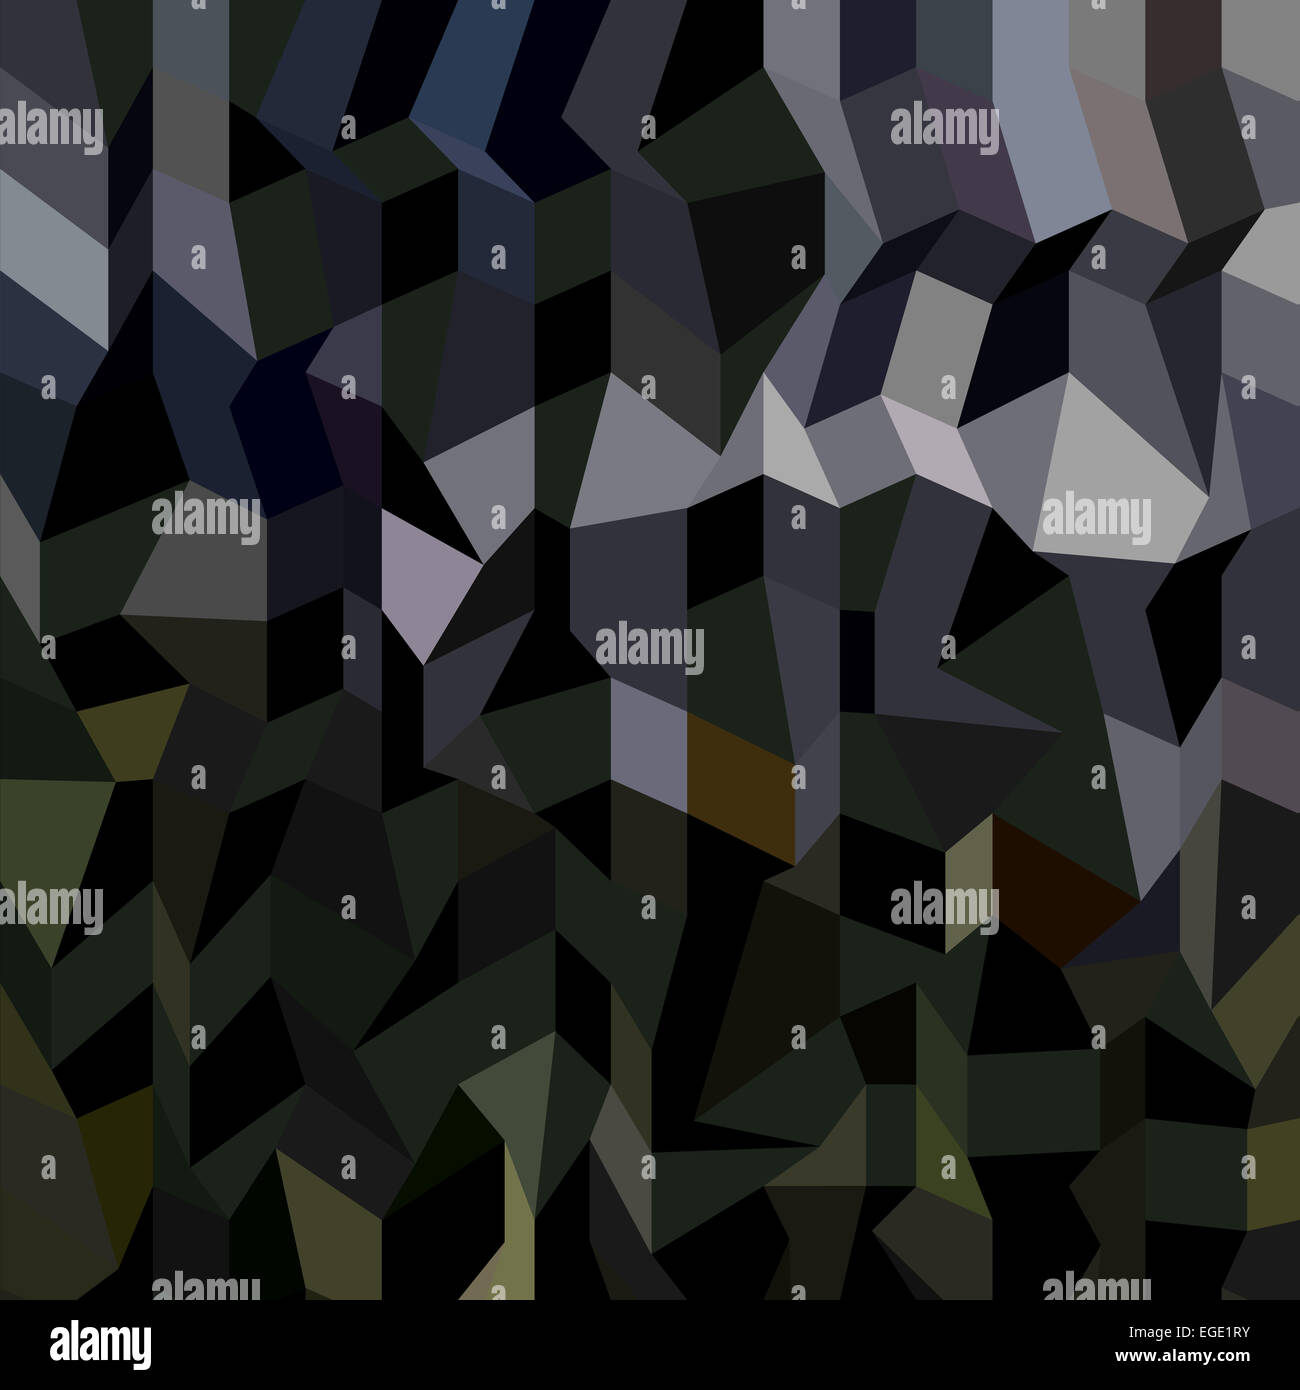 Low polygon style illustration of a camouflage abstract background. Stock Photo